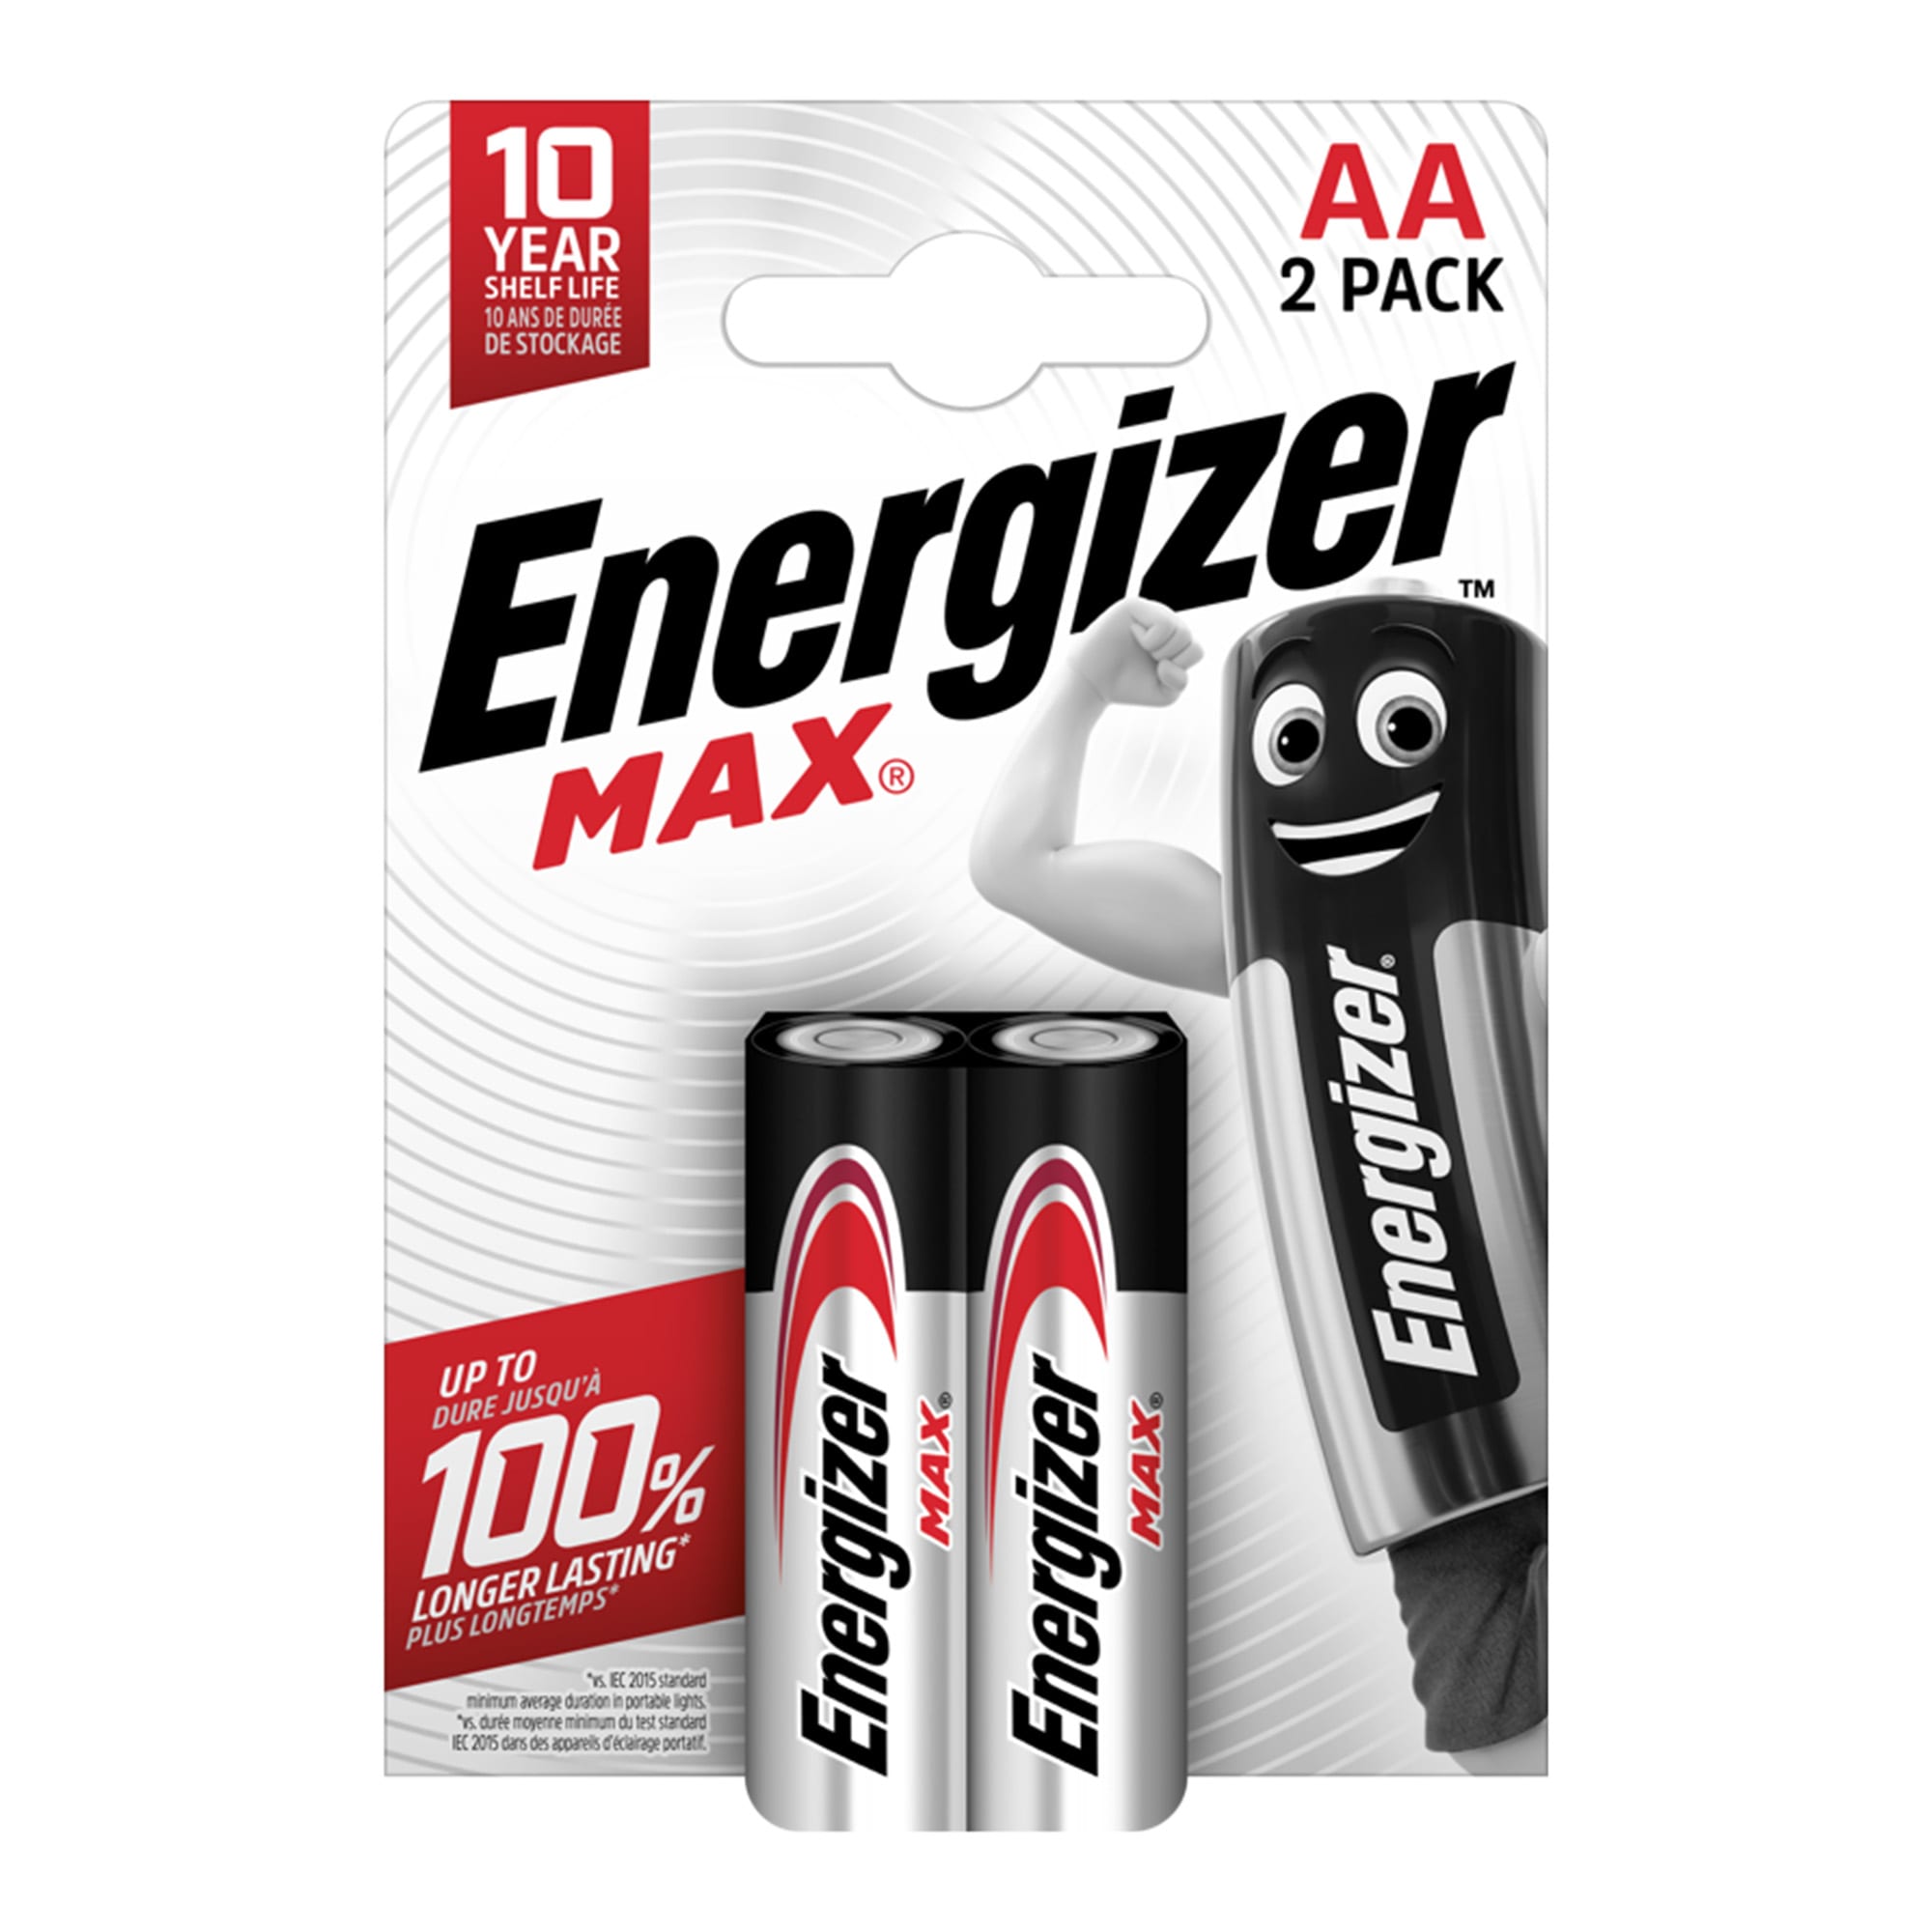 Energizer Max AA 2-Pack